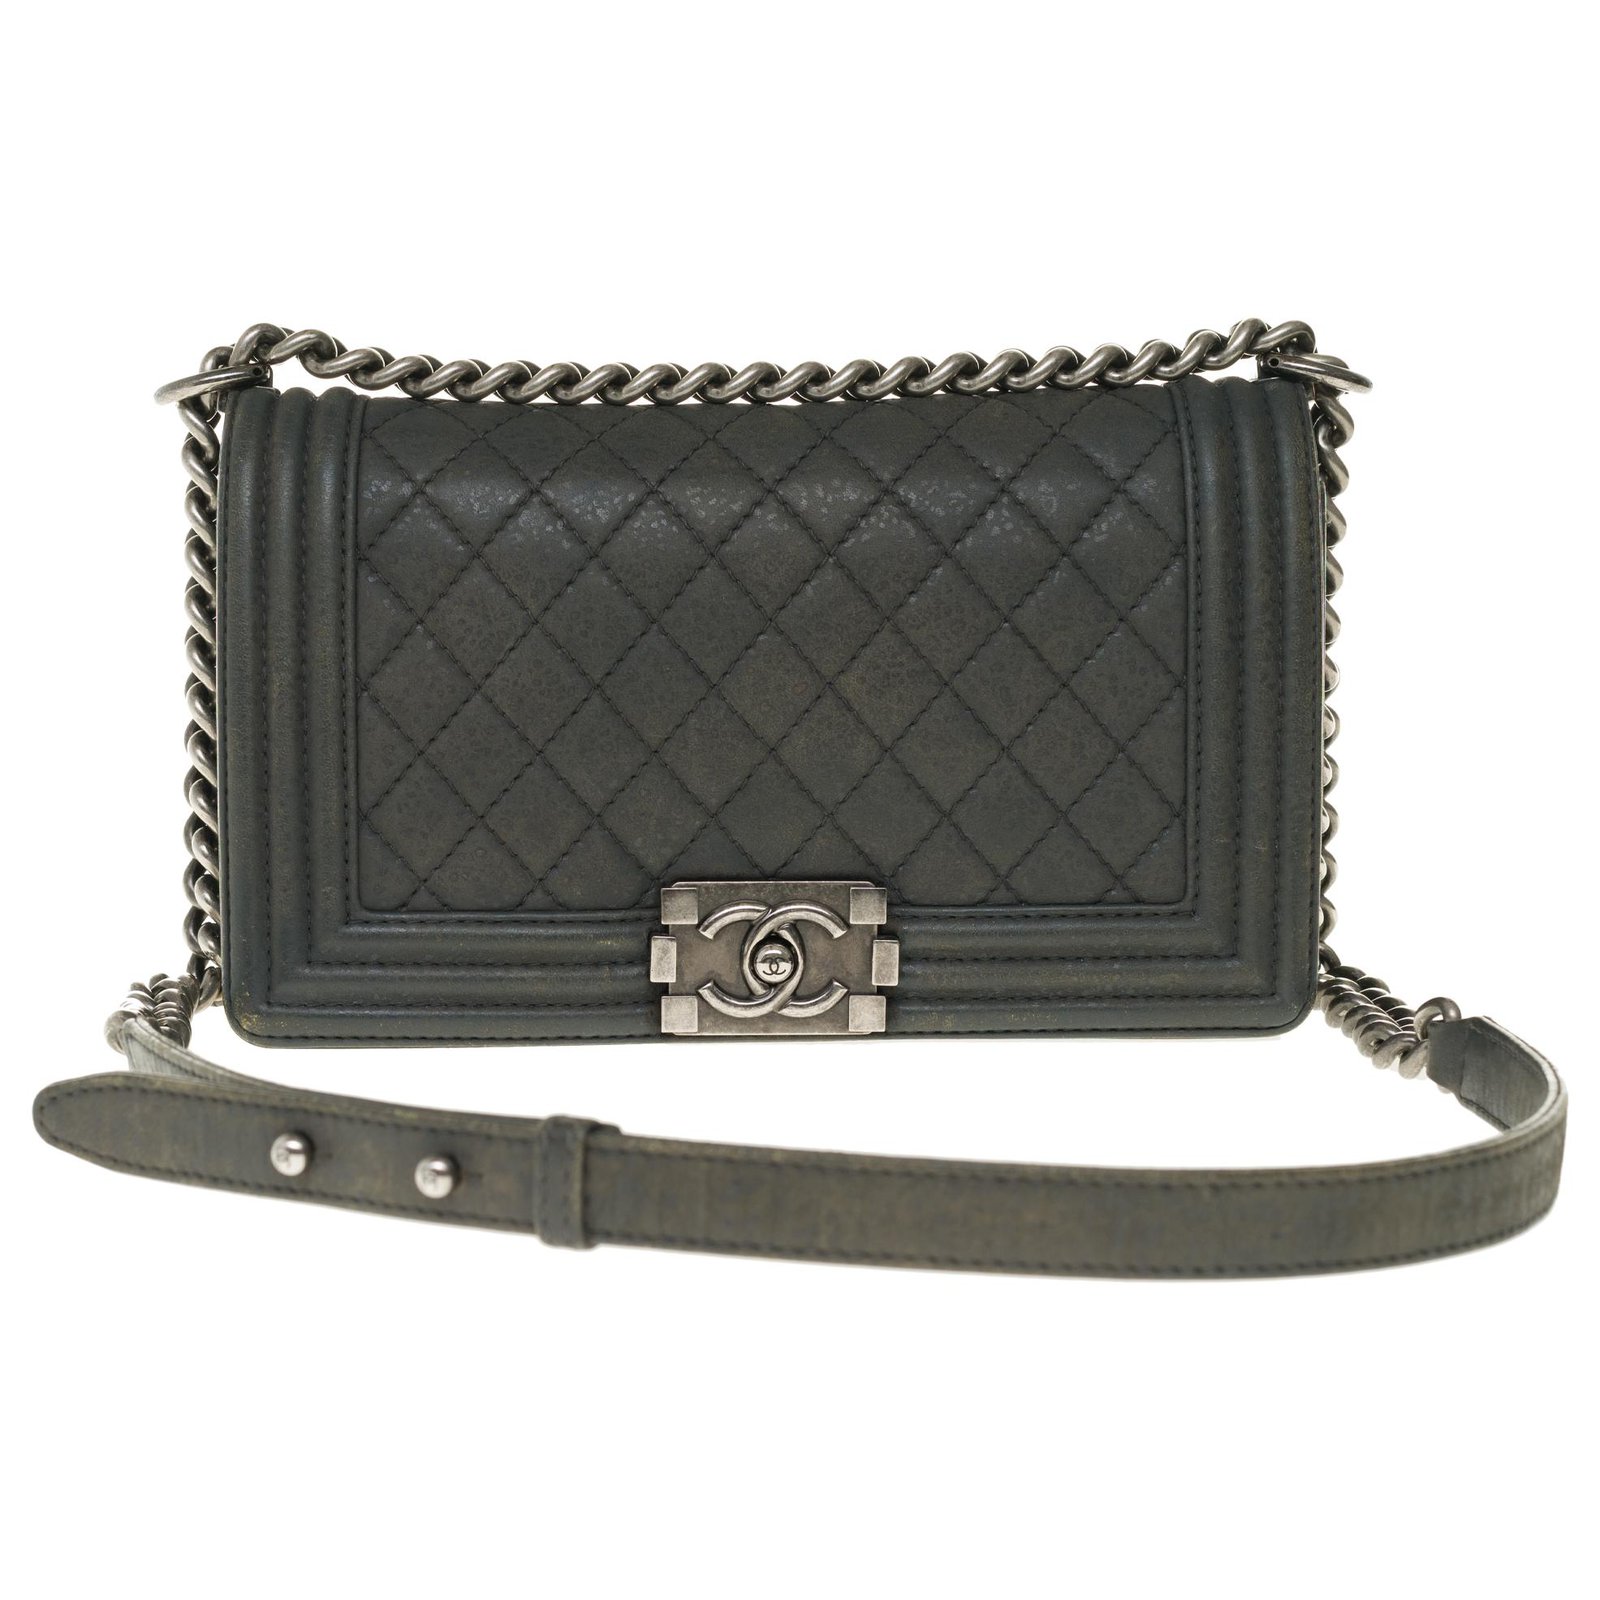 Superb Chanel Boy old medium quilted bag in gray aged effect